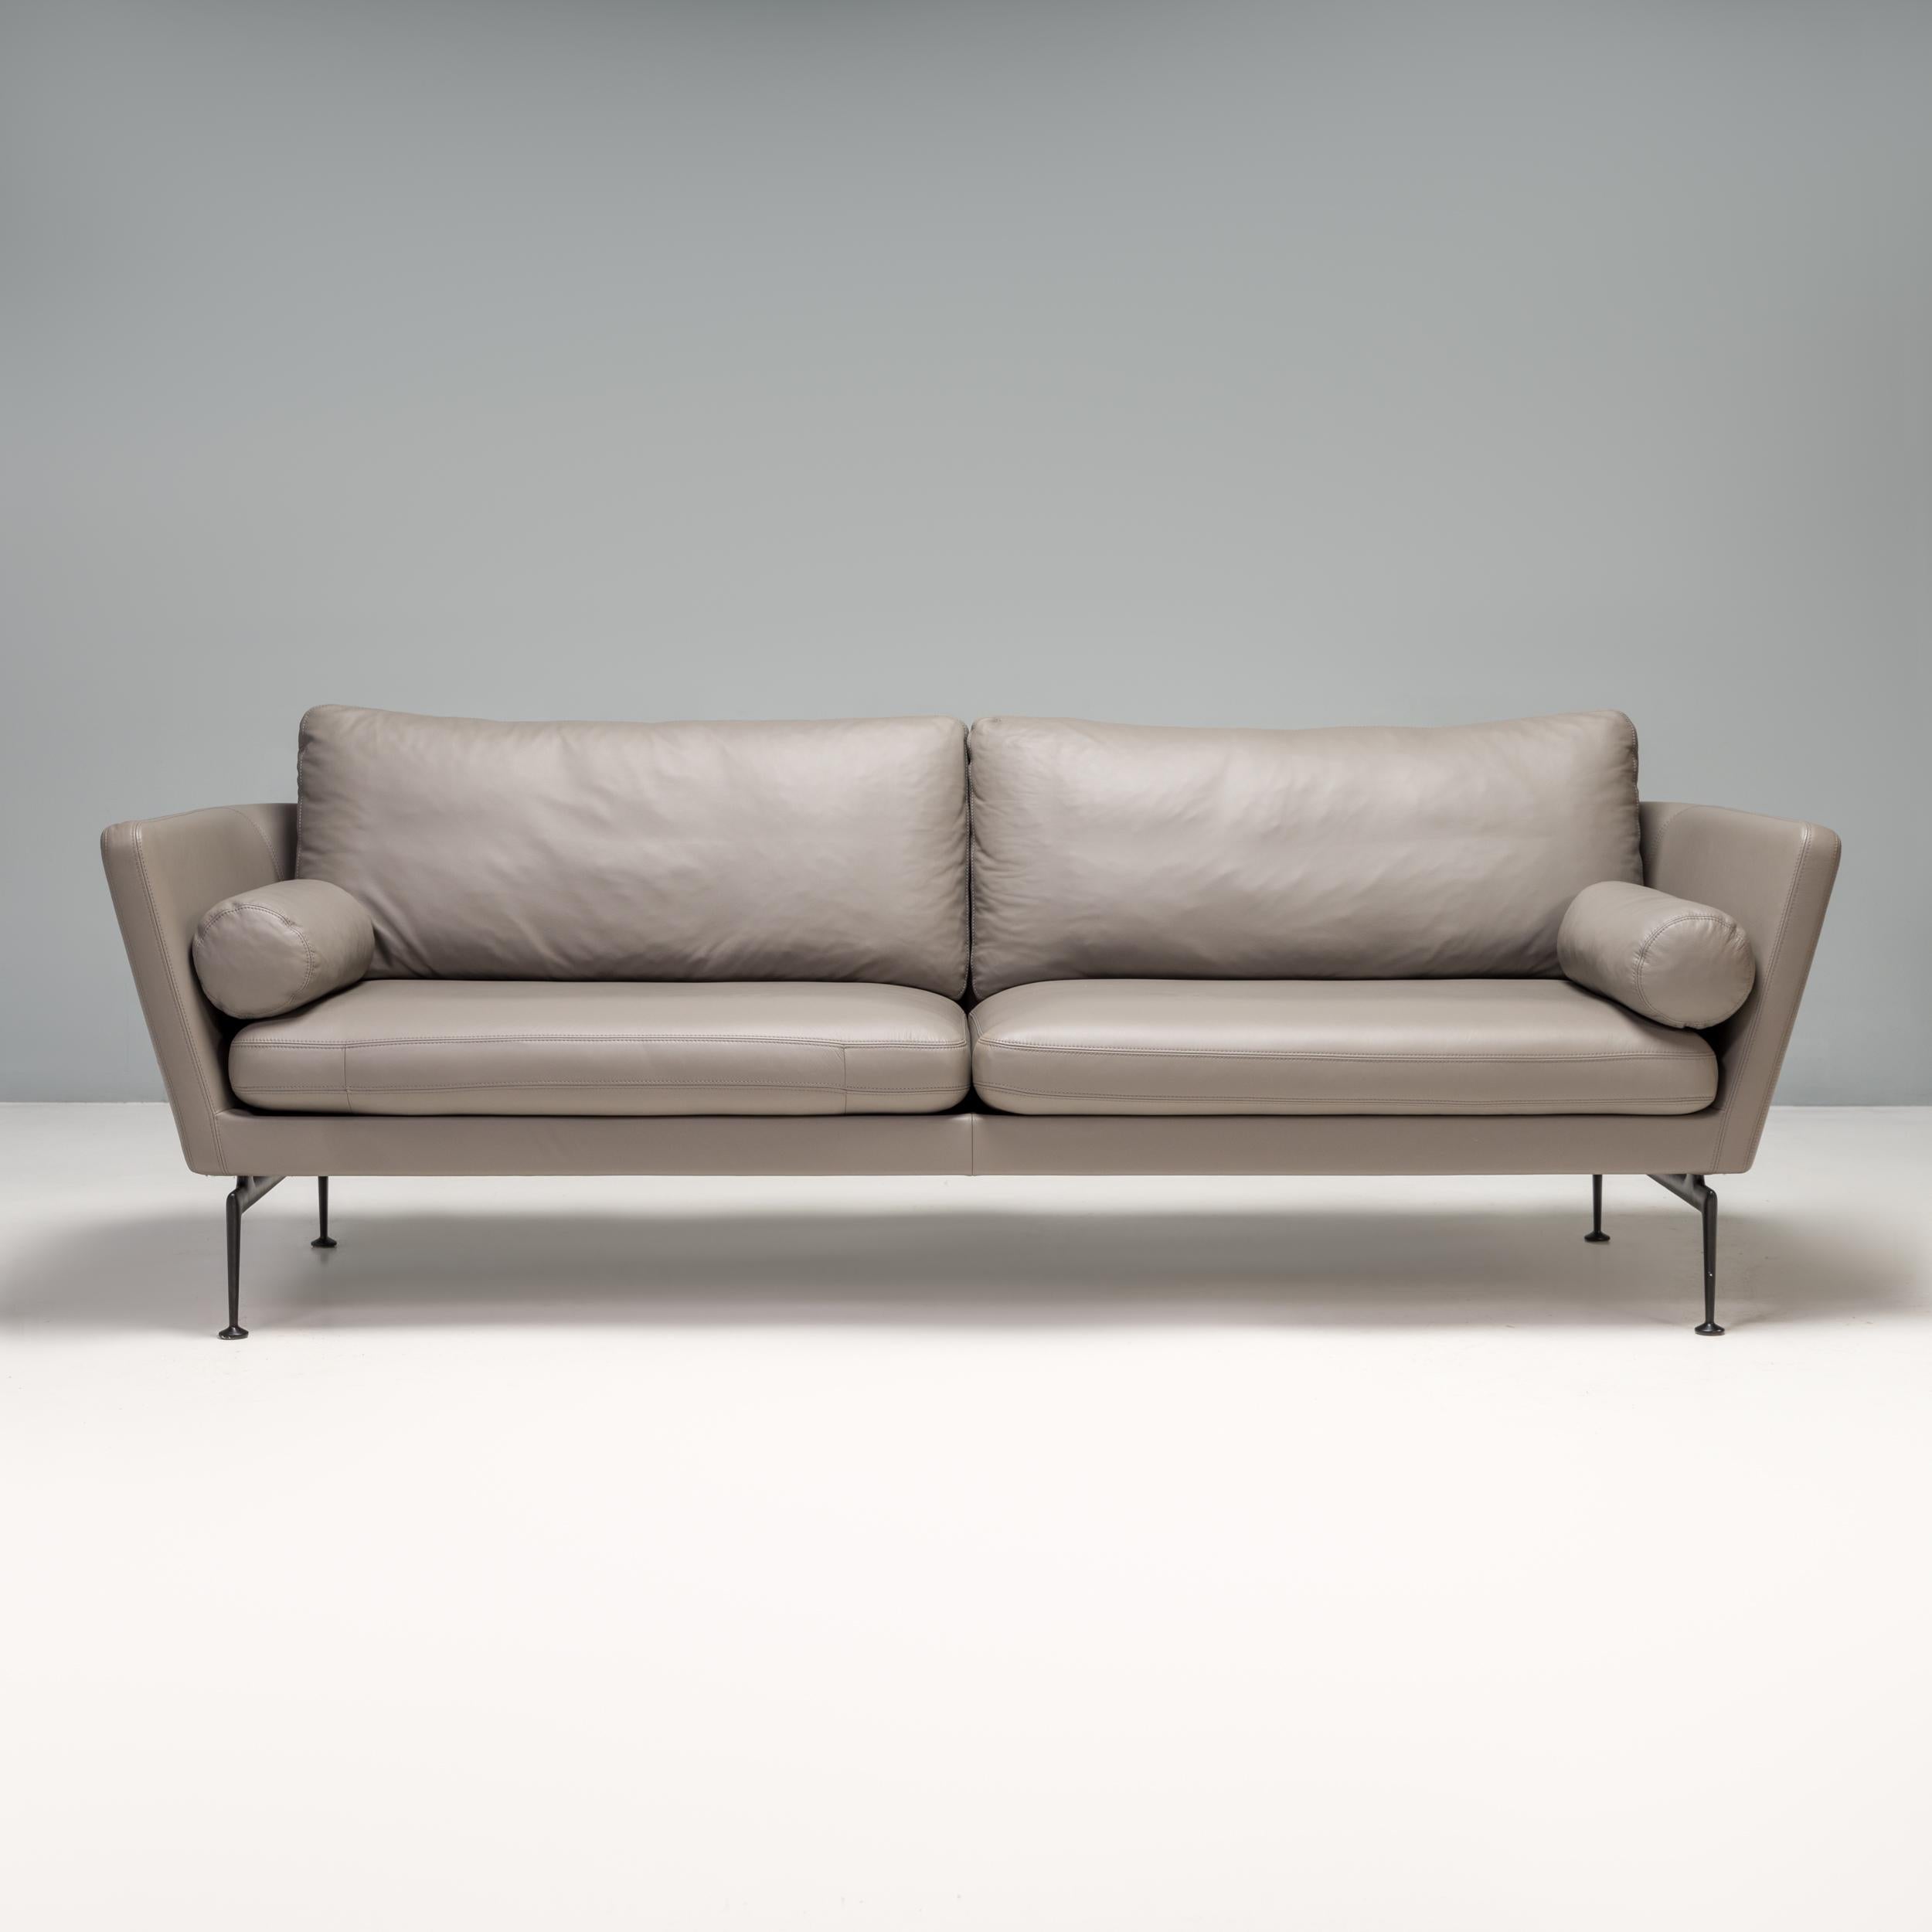 Originally designed in 2010 by Antonio Citterio for Vitra, the suita sofa is a fantastic example of modern design.

The sofa has a slimline tuxedo style frame with integrated armrests and is fully upholstered in grey leather.

The sofa sits on